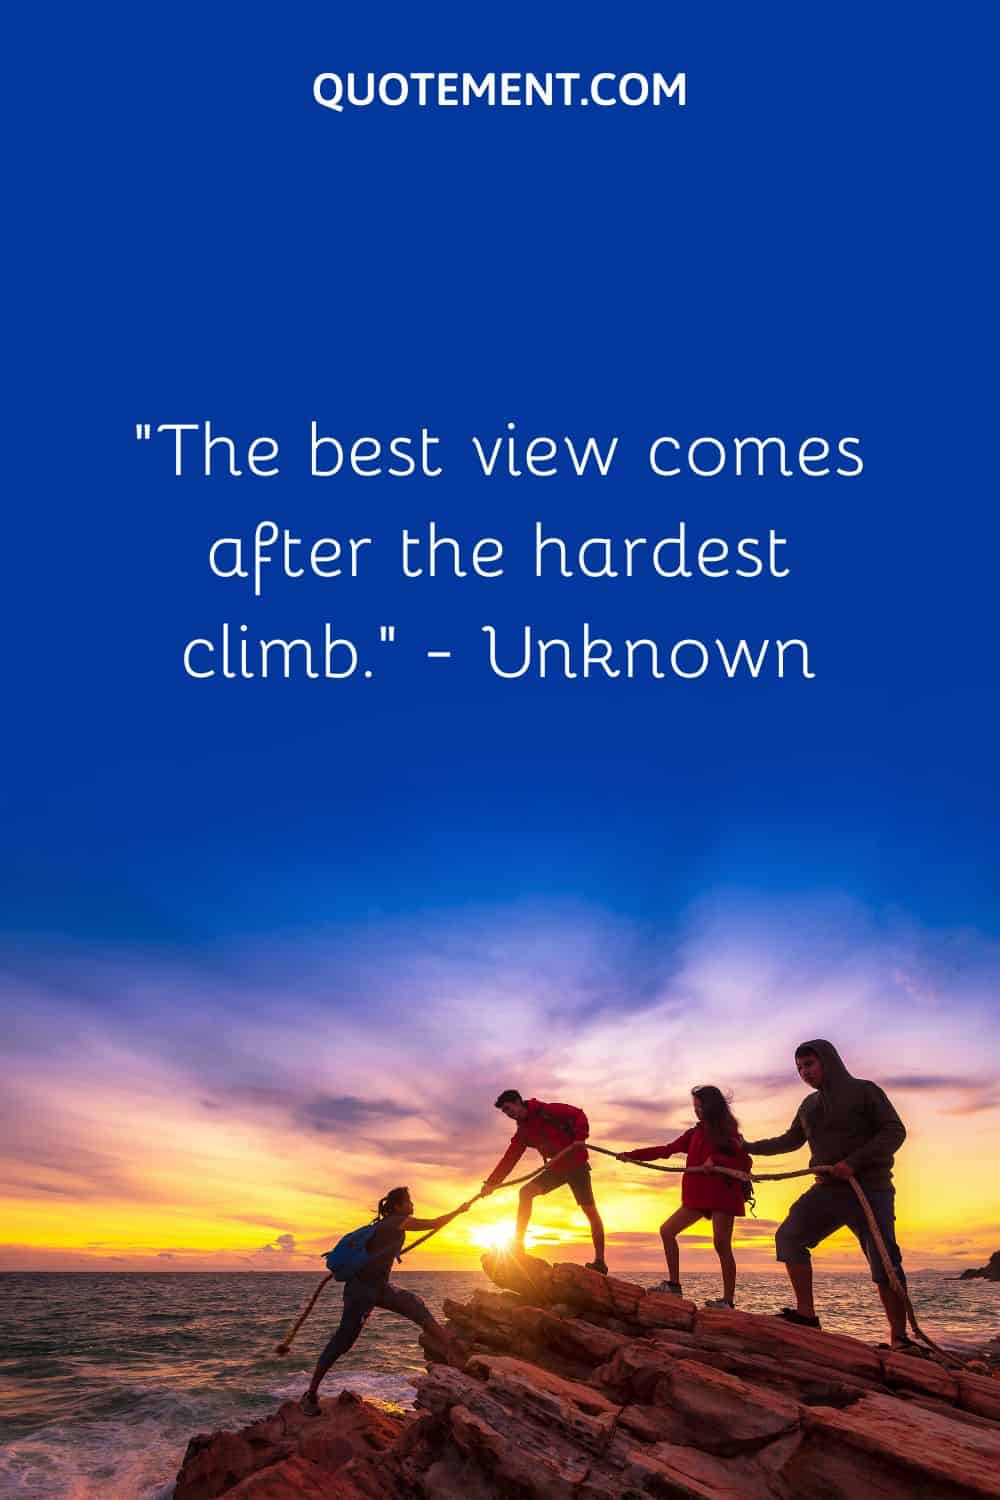 “The best view comes after the hardest climb.” — Unknown